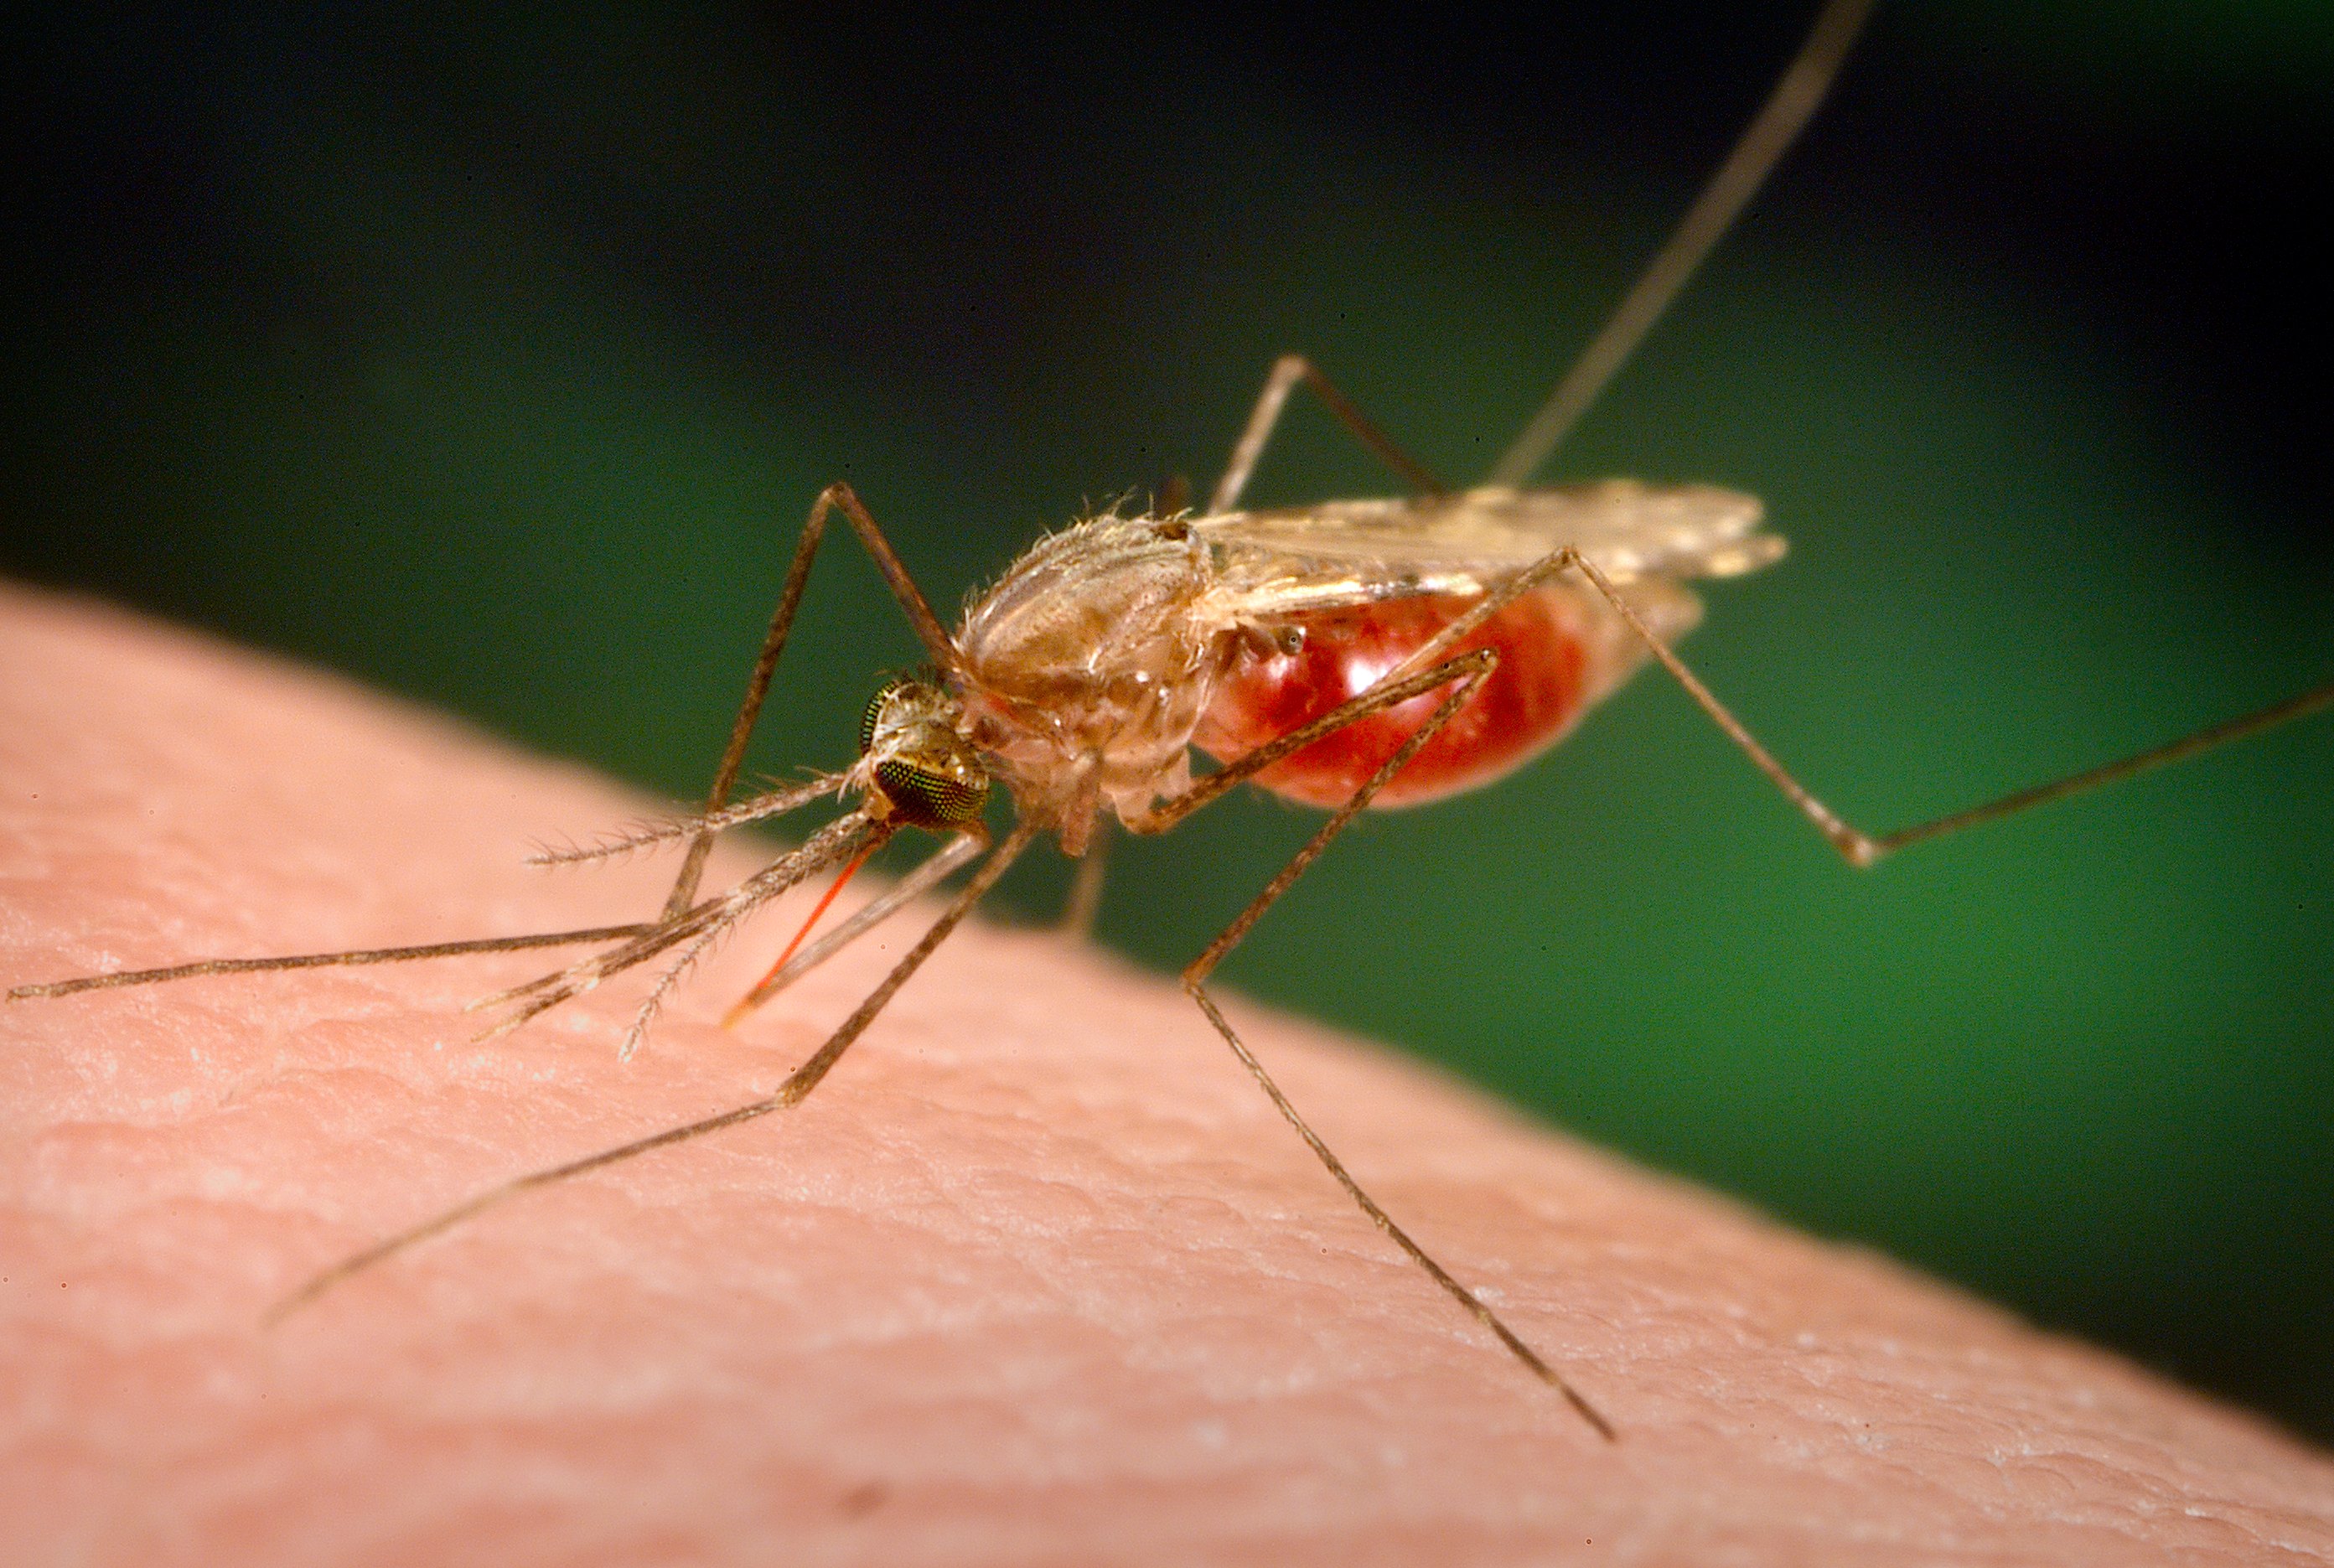 Council Boss Harps On Support To Eliminate Malaria